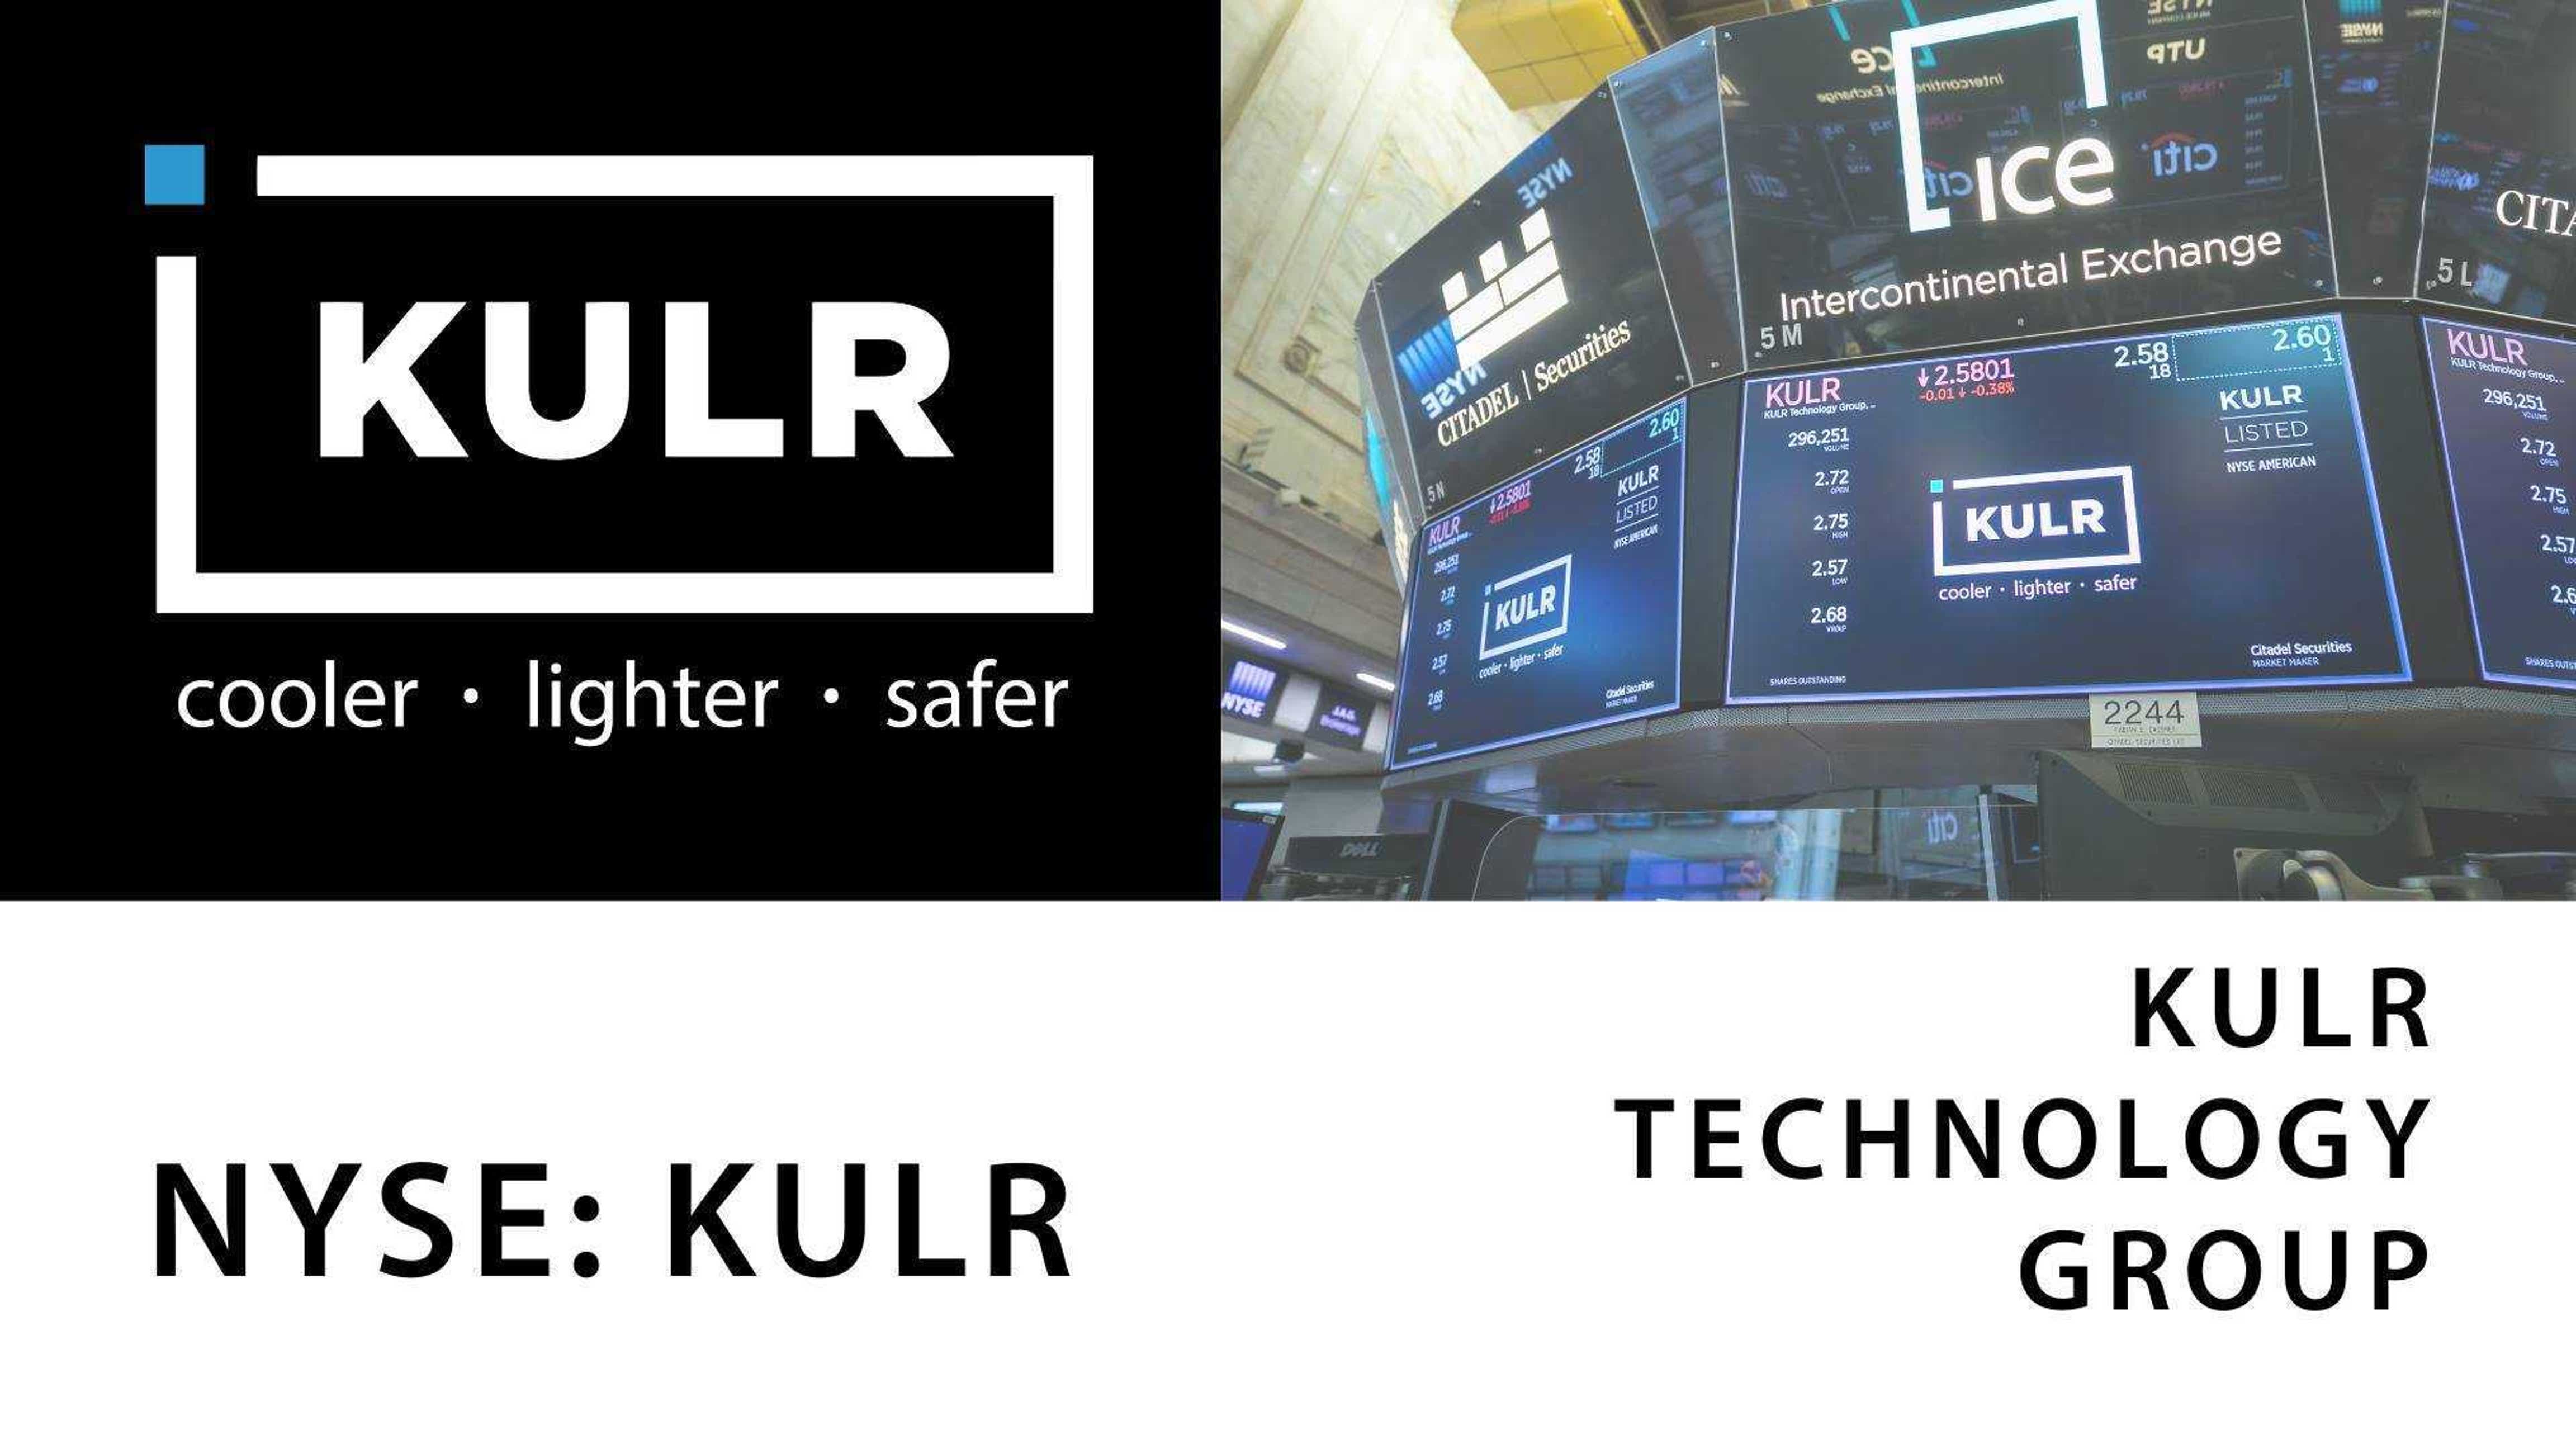 203035959 4201821156506790 4317361112343305576 n.jpg?optimize=medium&dpr=1 KULR Technology Group (NASDAQ: KULR) NASA-backed technologies in thermal management and battery storage solutions have proven to be a solution — not just on Earth but also in outer space — providing astronauts with a means to better do their jobs while keeping tabs on those they love back home.